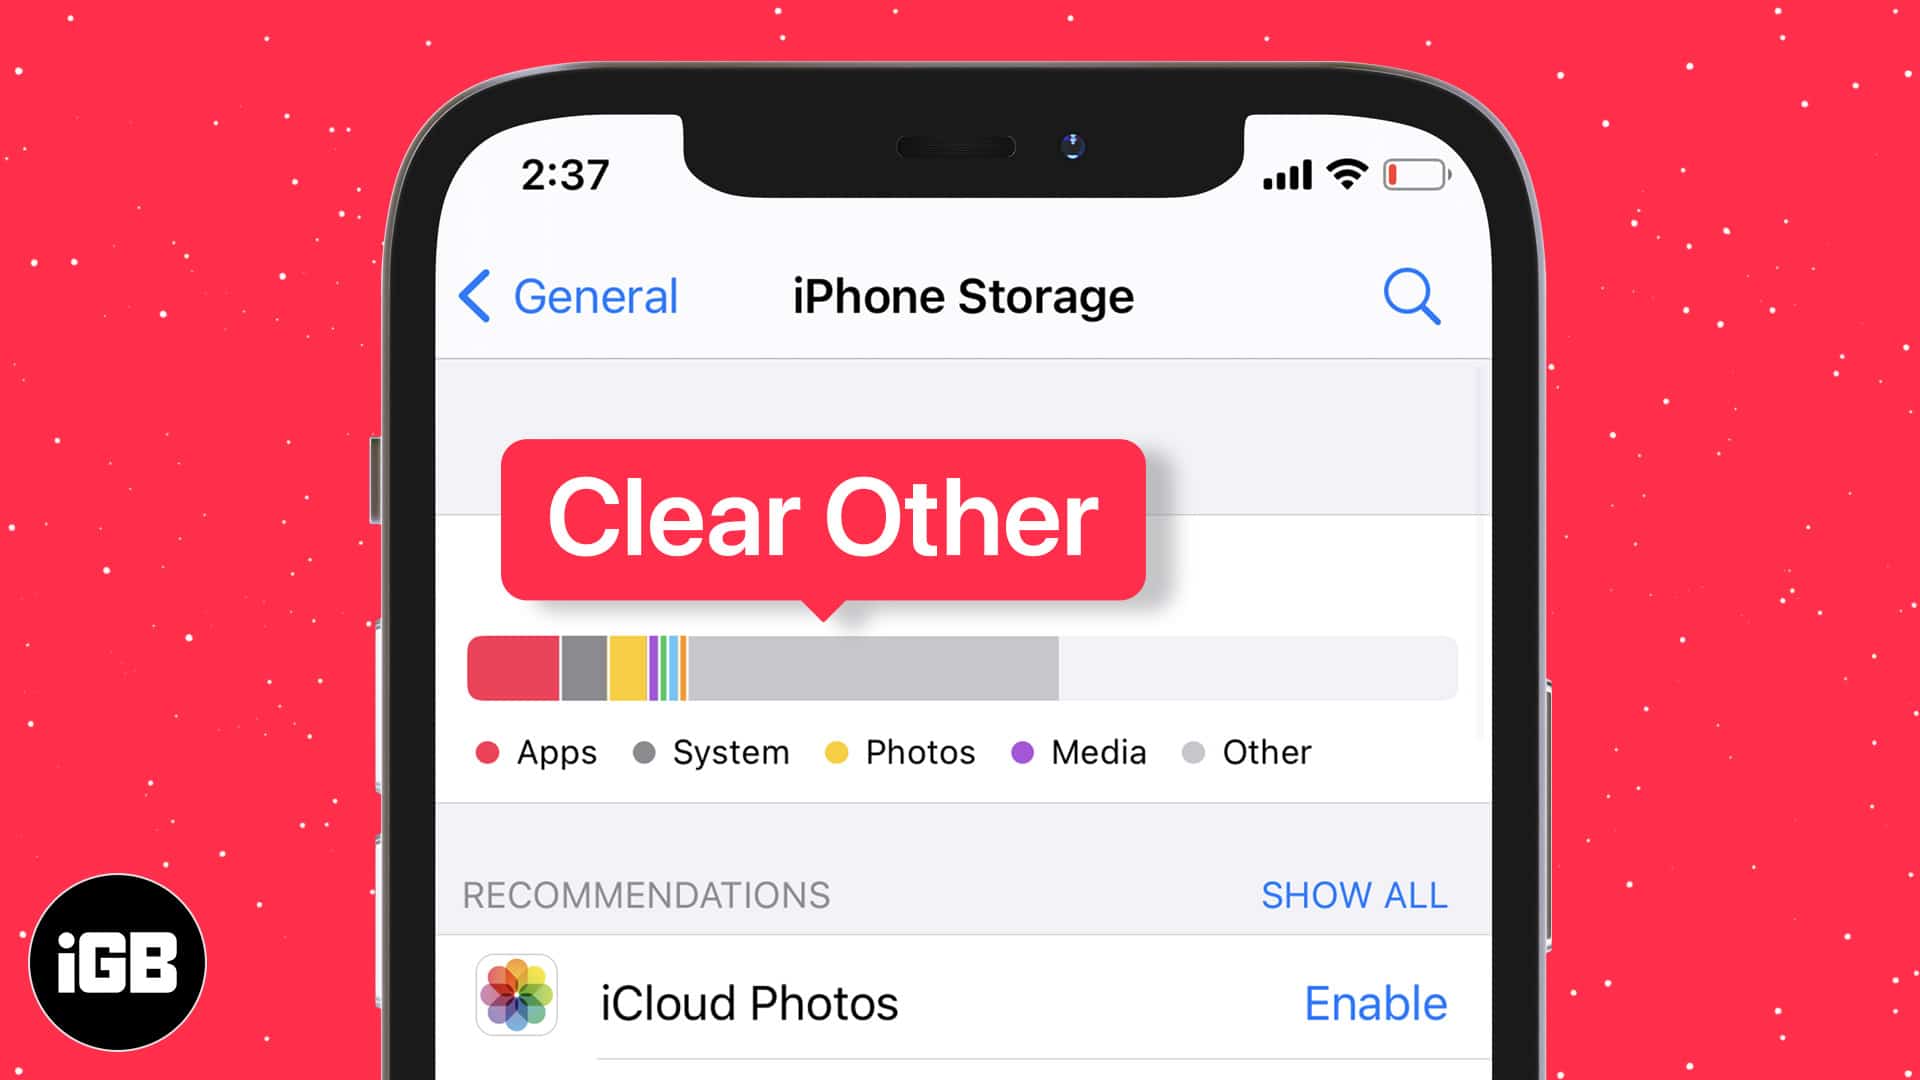 How to clear other storage on iphone